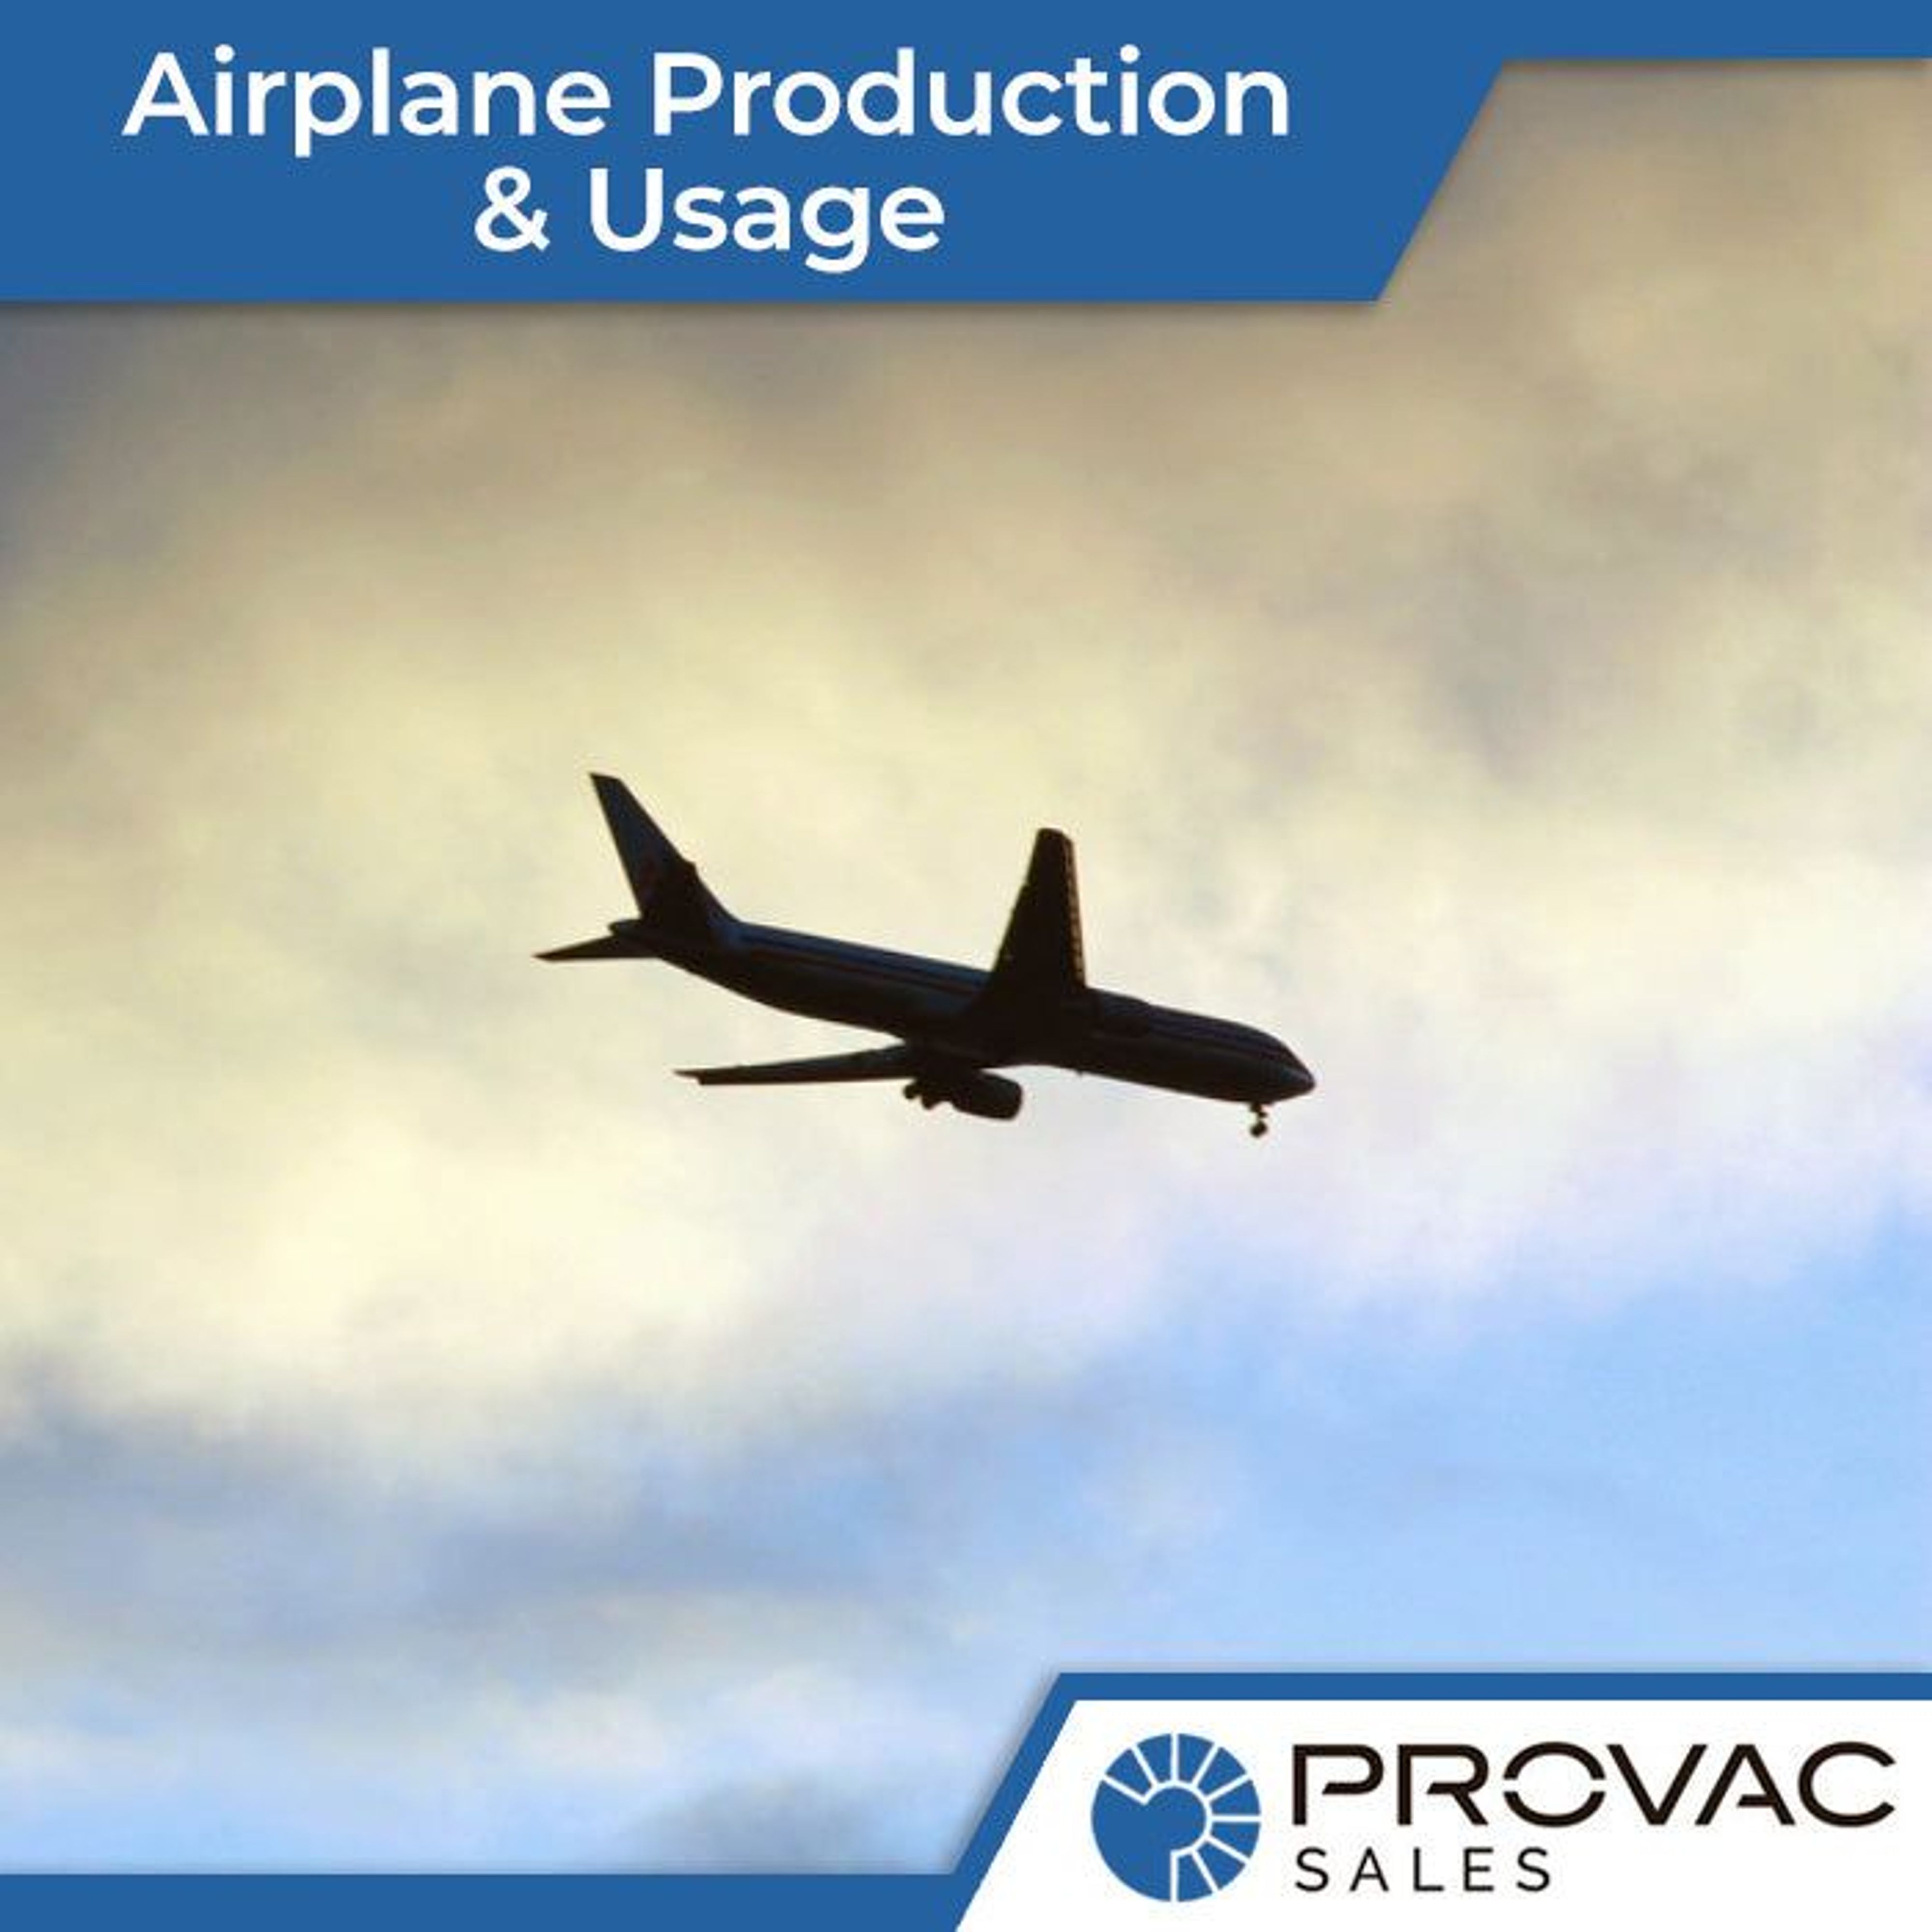 How Vacuum Pumps Help With the Production and Usage of Airplanes Background